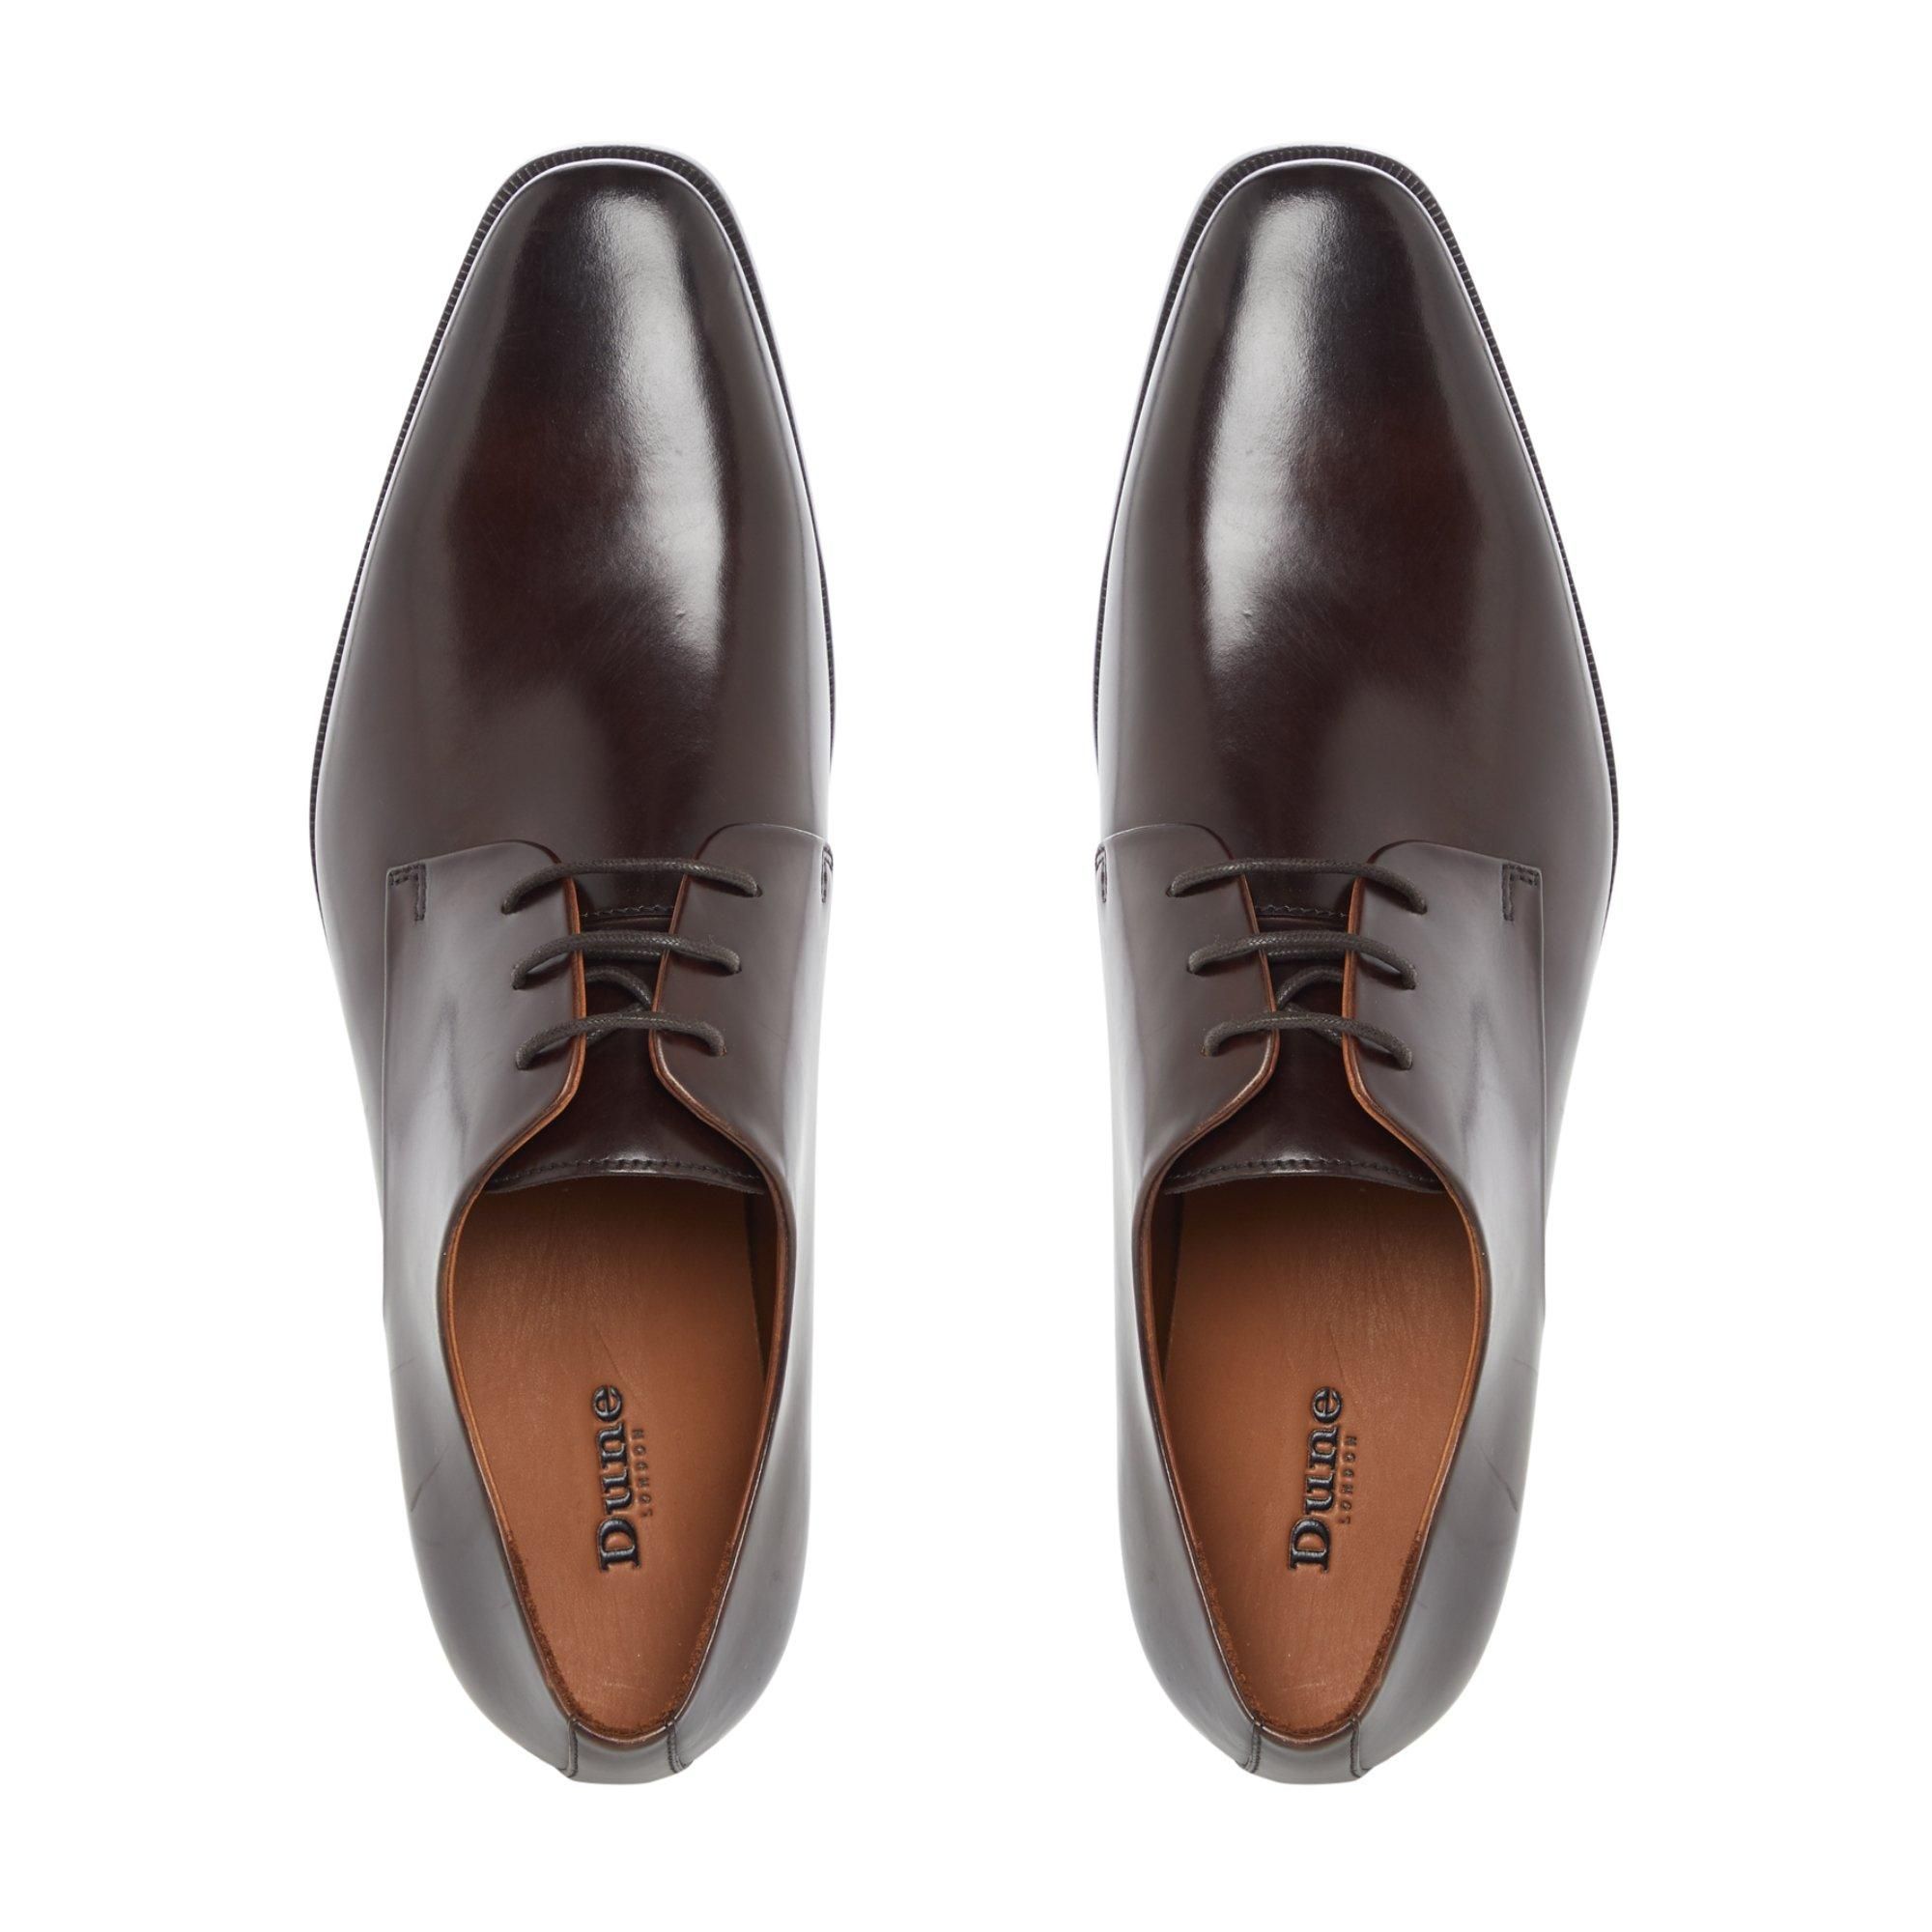 Simple yet sophisticated, the Superb shoe is ideal for formal outfits. Resting on a low block heel, with a contemporary panel design. They're finished with a square toe and secured with lace fastenings.